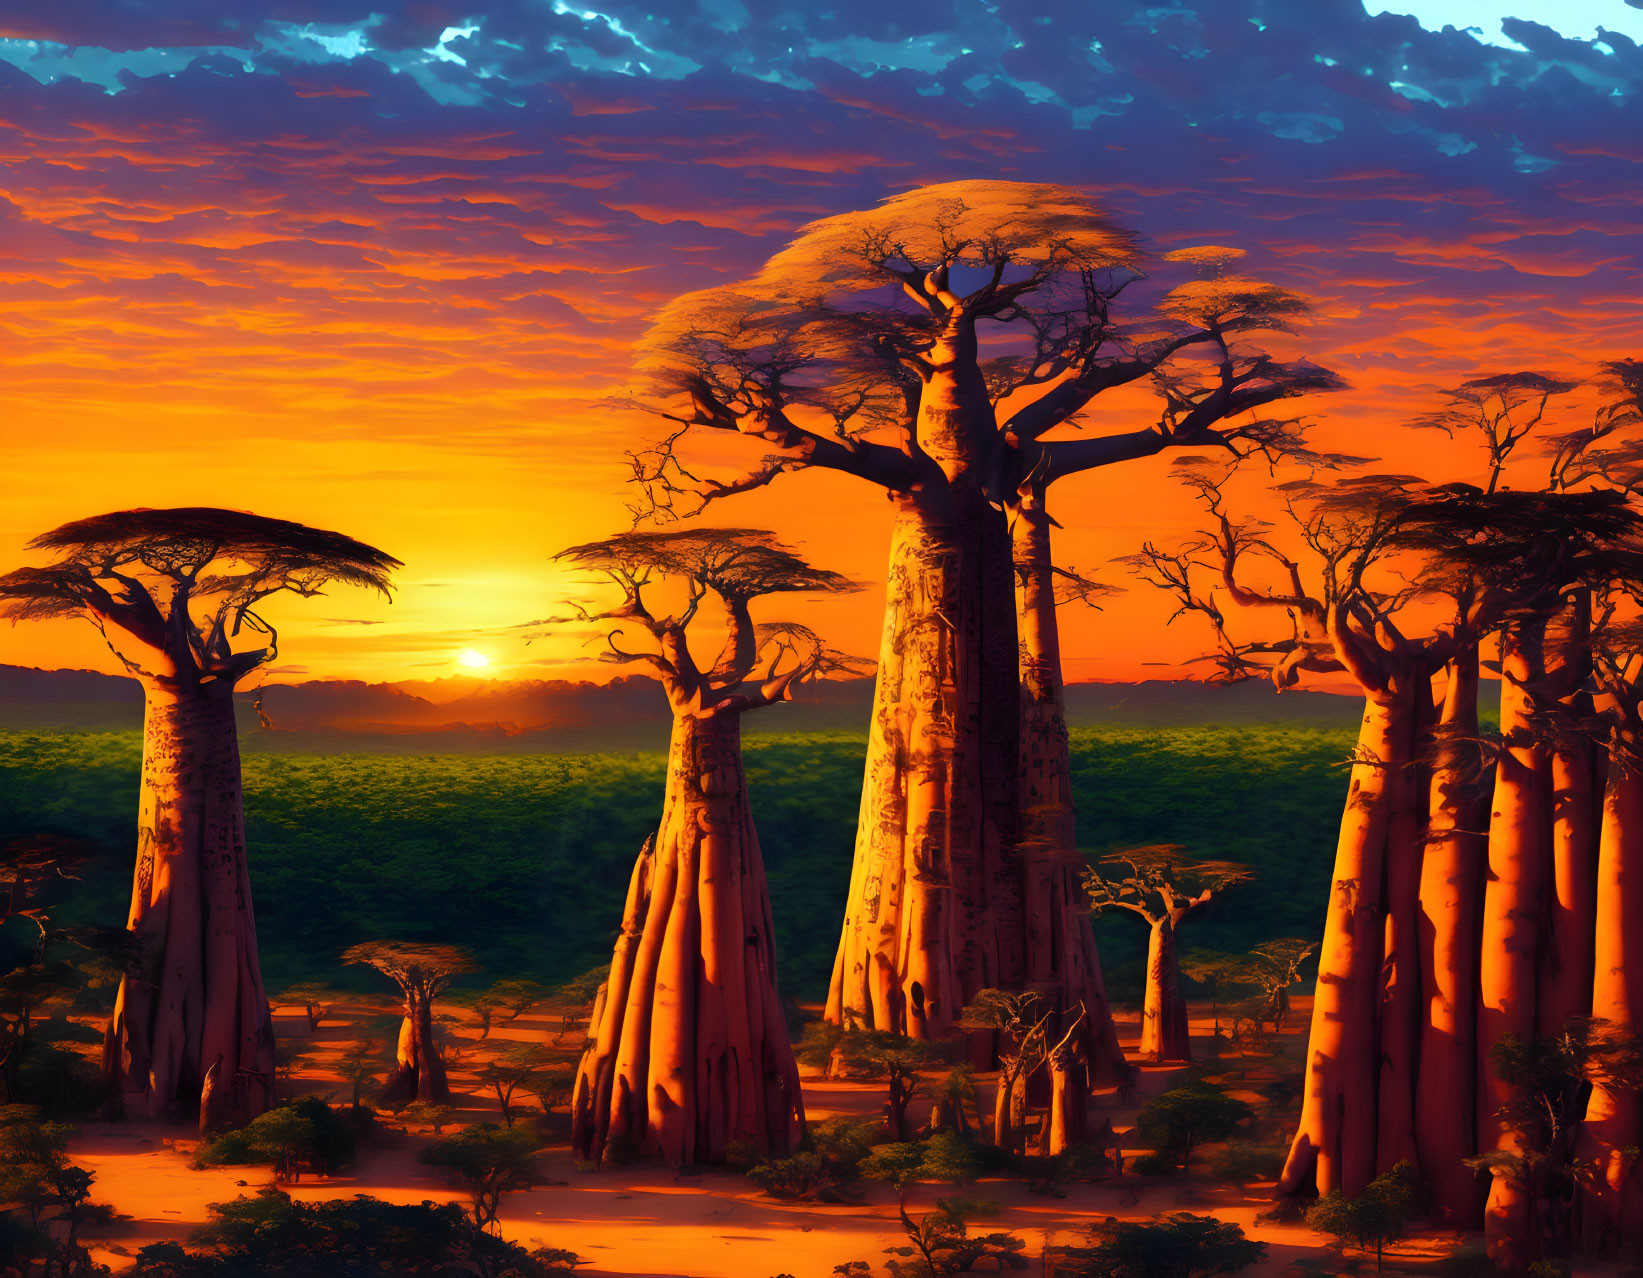 African savannah landscape with baobab trees under vibrant sunset sky